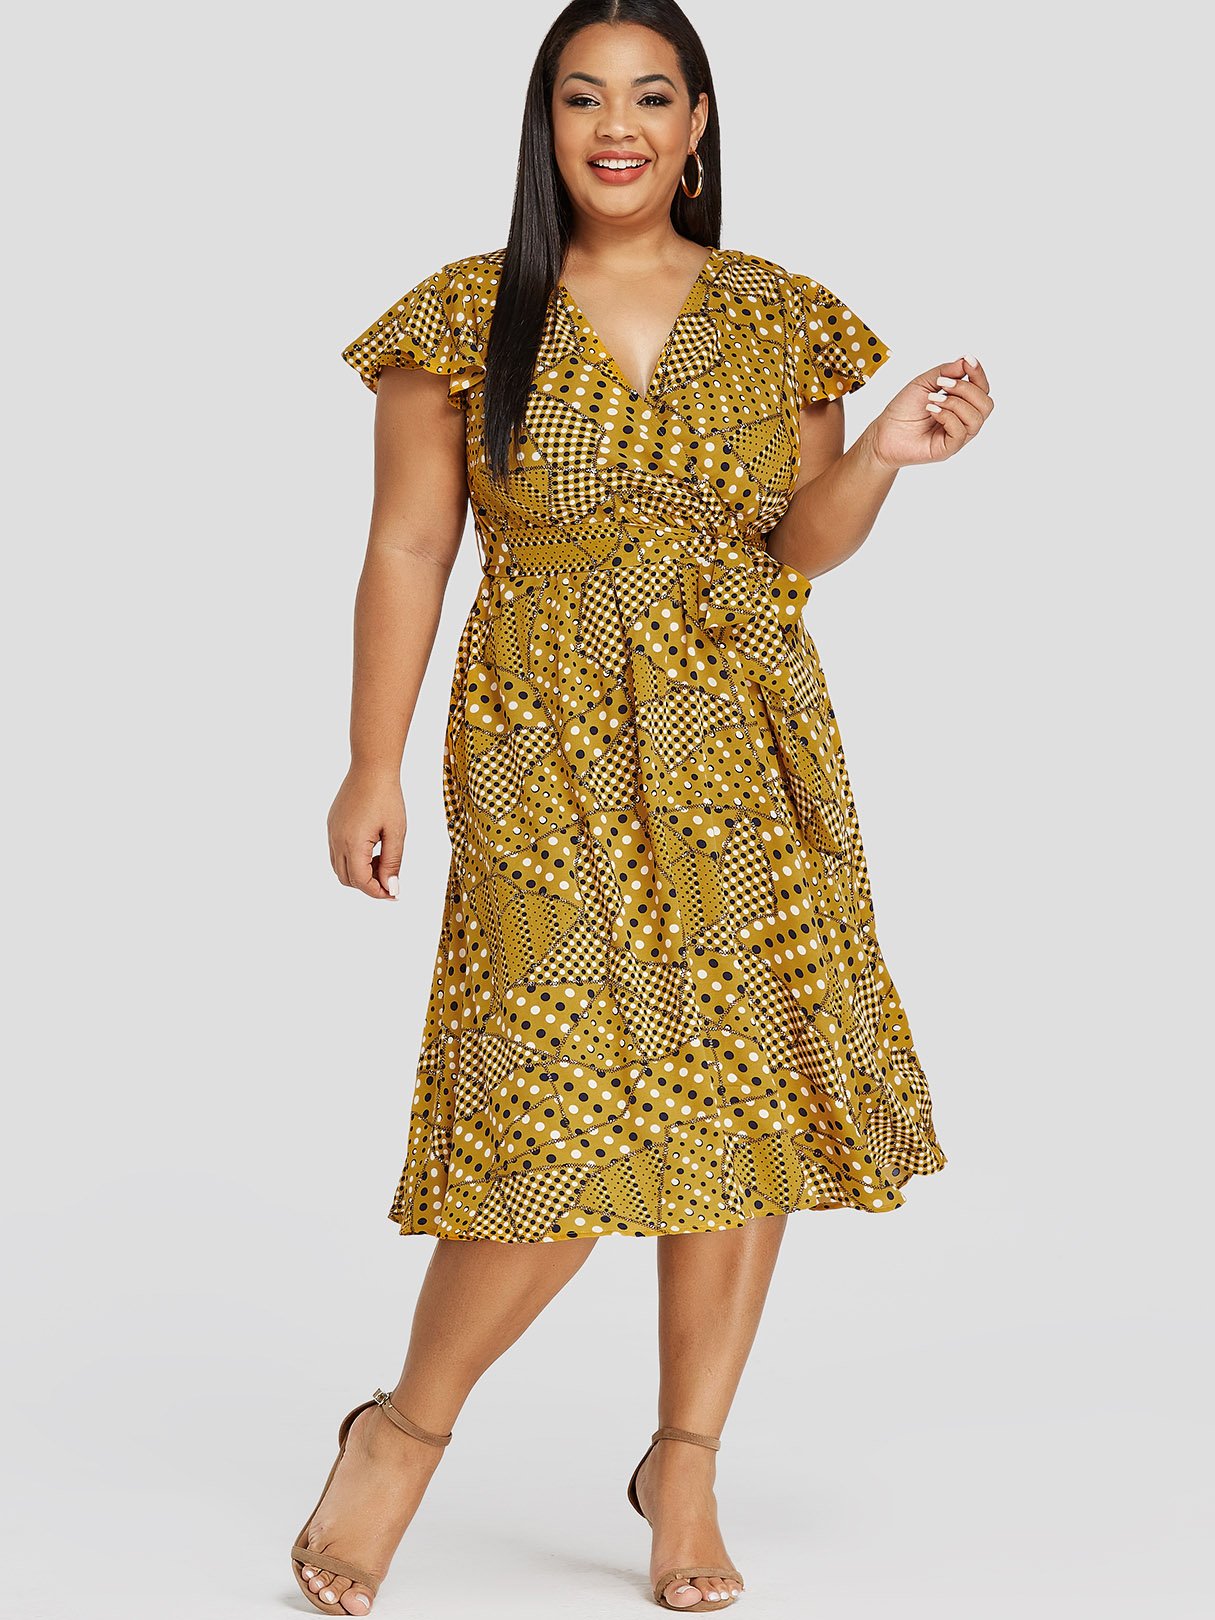 Wholesale V-Neck Polka Dot Crossed Front Self-Tie Short Sleeve Yellow Plus Size Dress